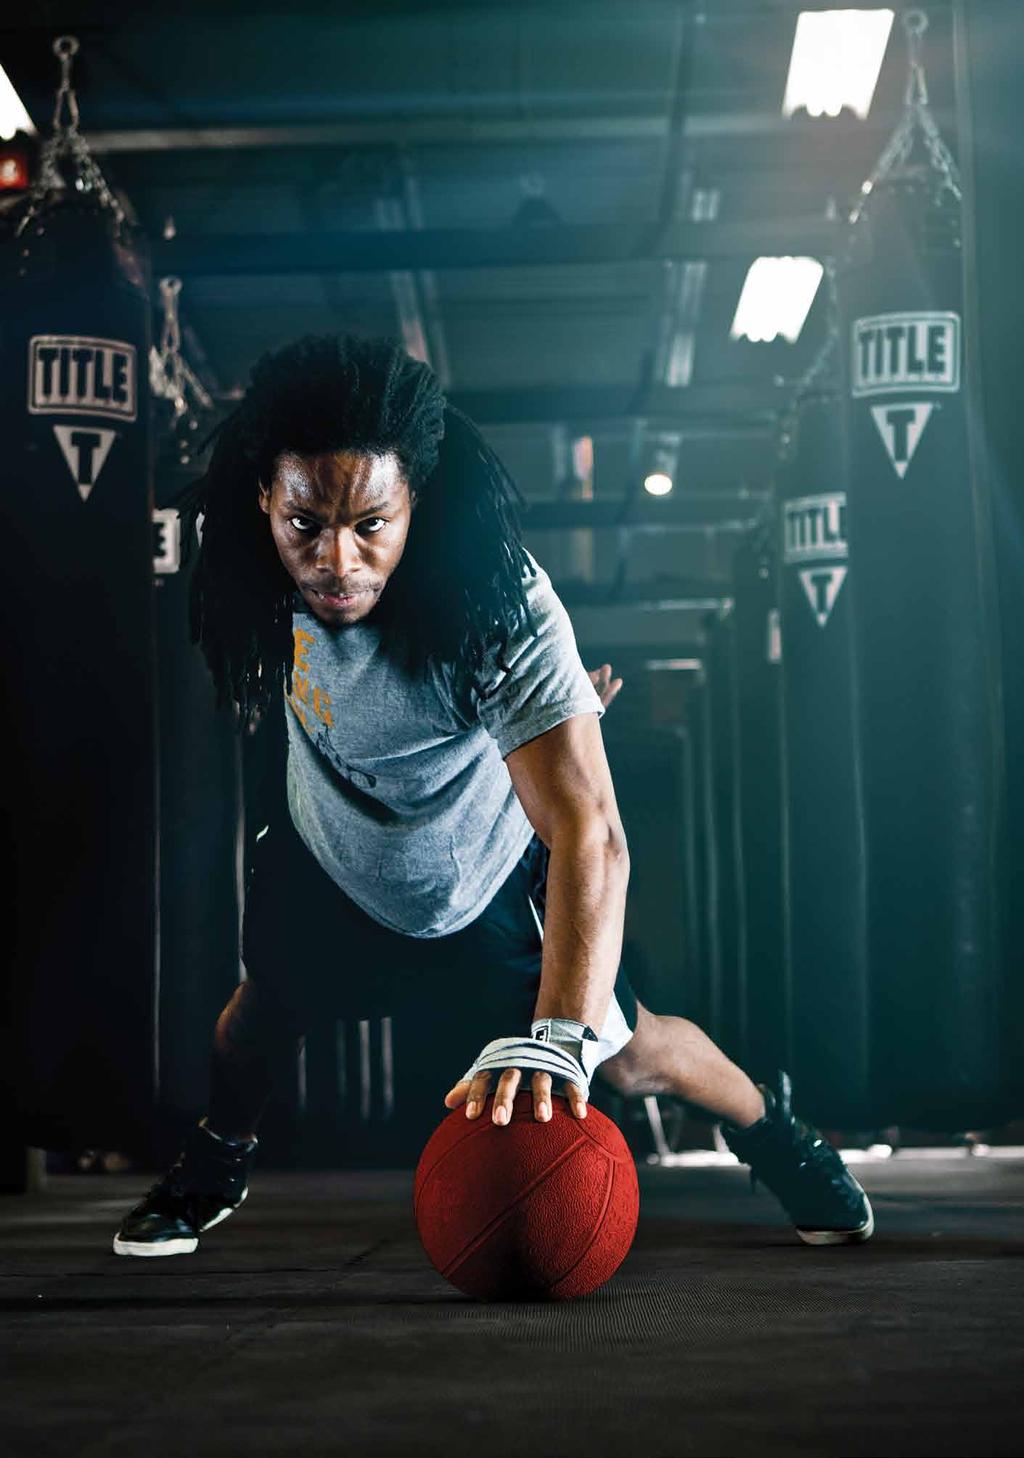 Written by Mark Golombek At Title Boxing Club, personal trainers help members burn 1,000 calories in a single hour with total body boxing and kickboxing fitness workouts that cater to all ages and